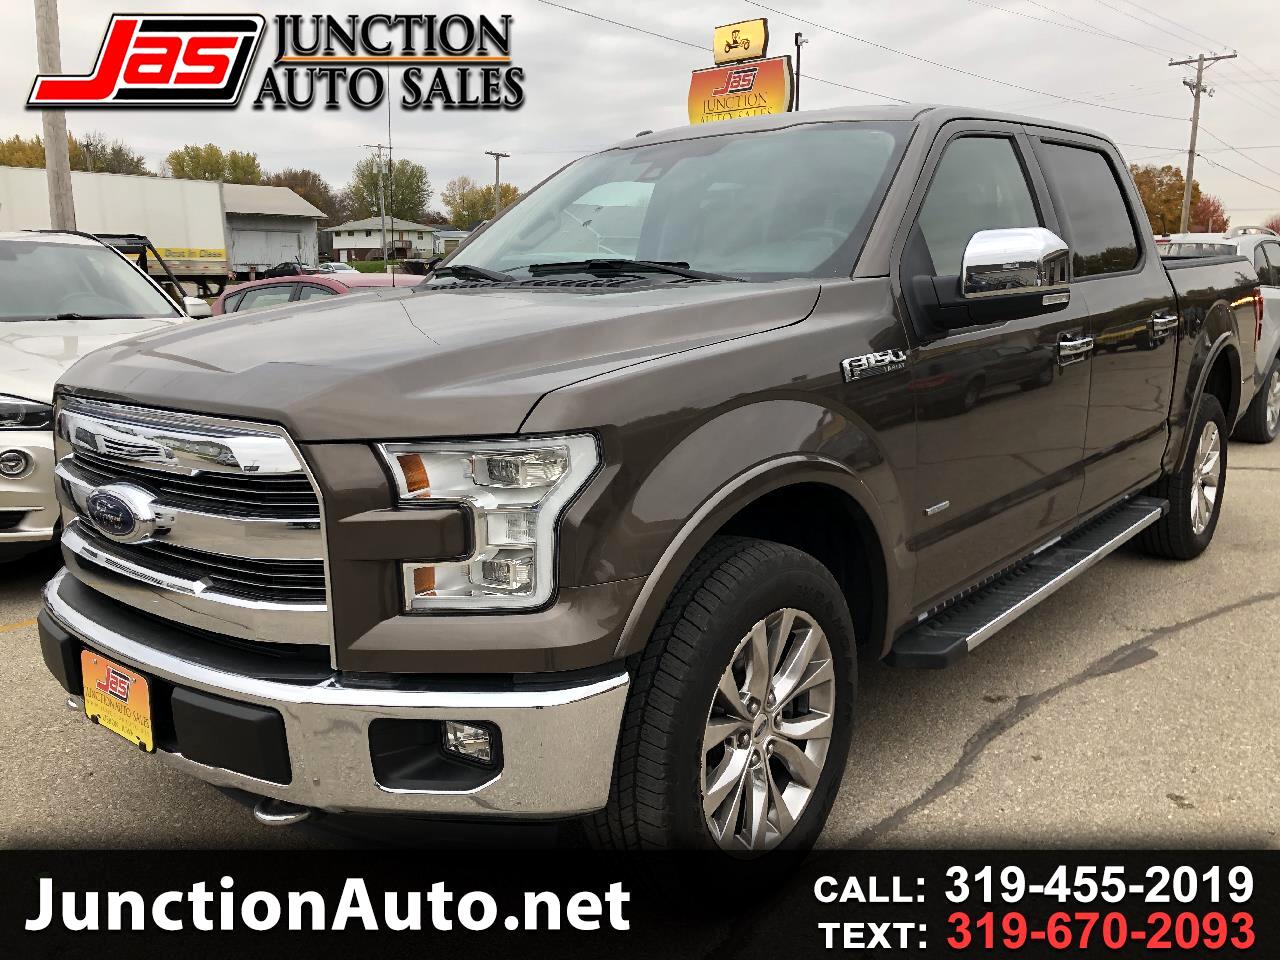 Used 2015 Ford F 150 Lariat Supercrew 5 5 Ft Bed 4wd For